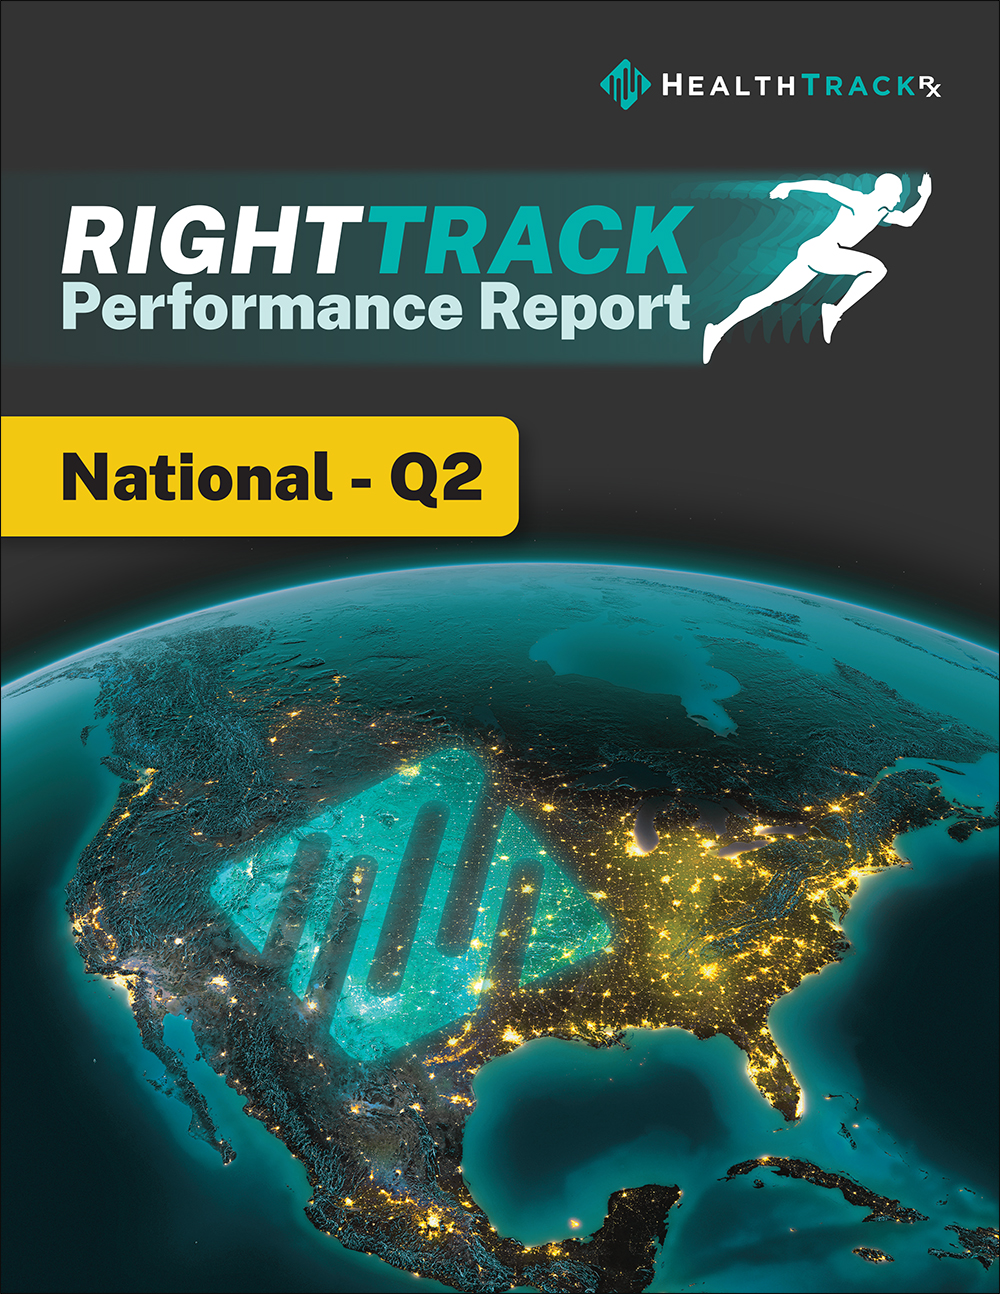 RIGHTTRACK Performance Report